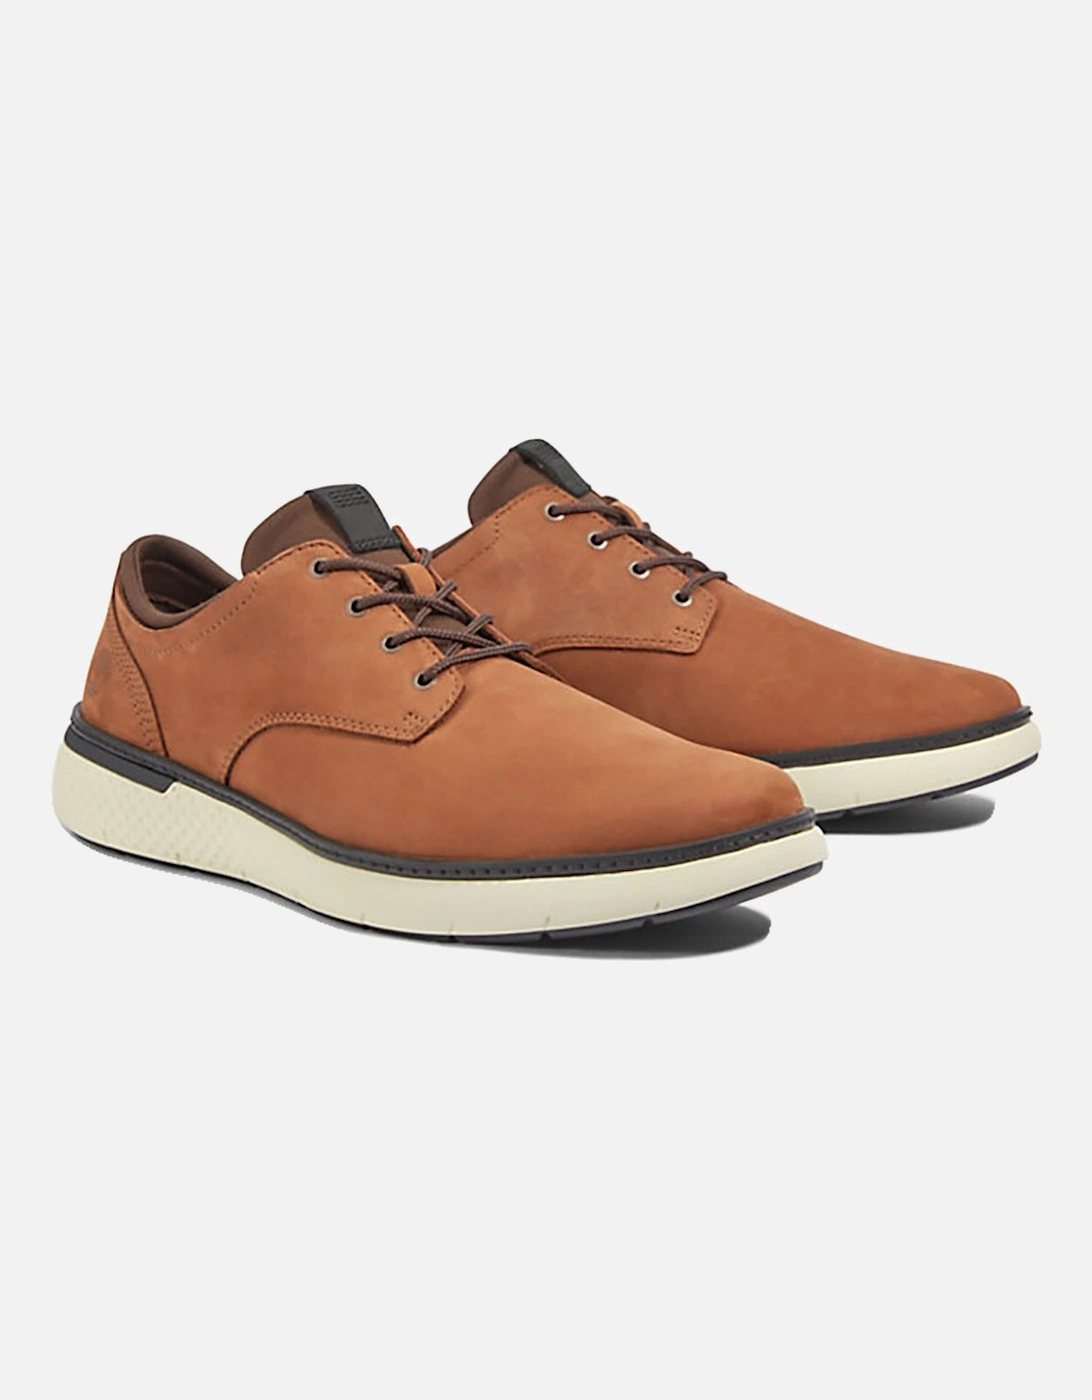 CROSS MARK OXFORD SHOES BROWN